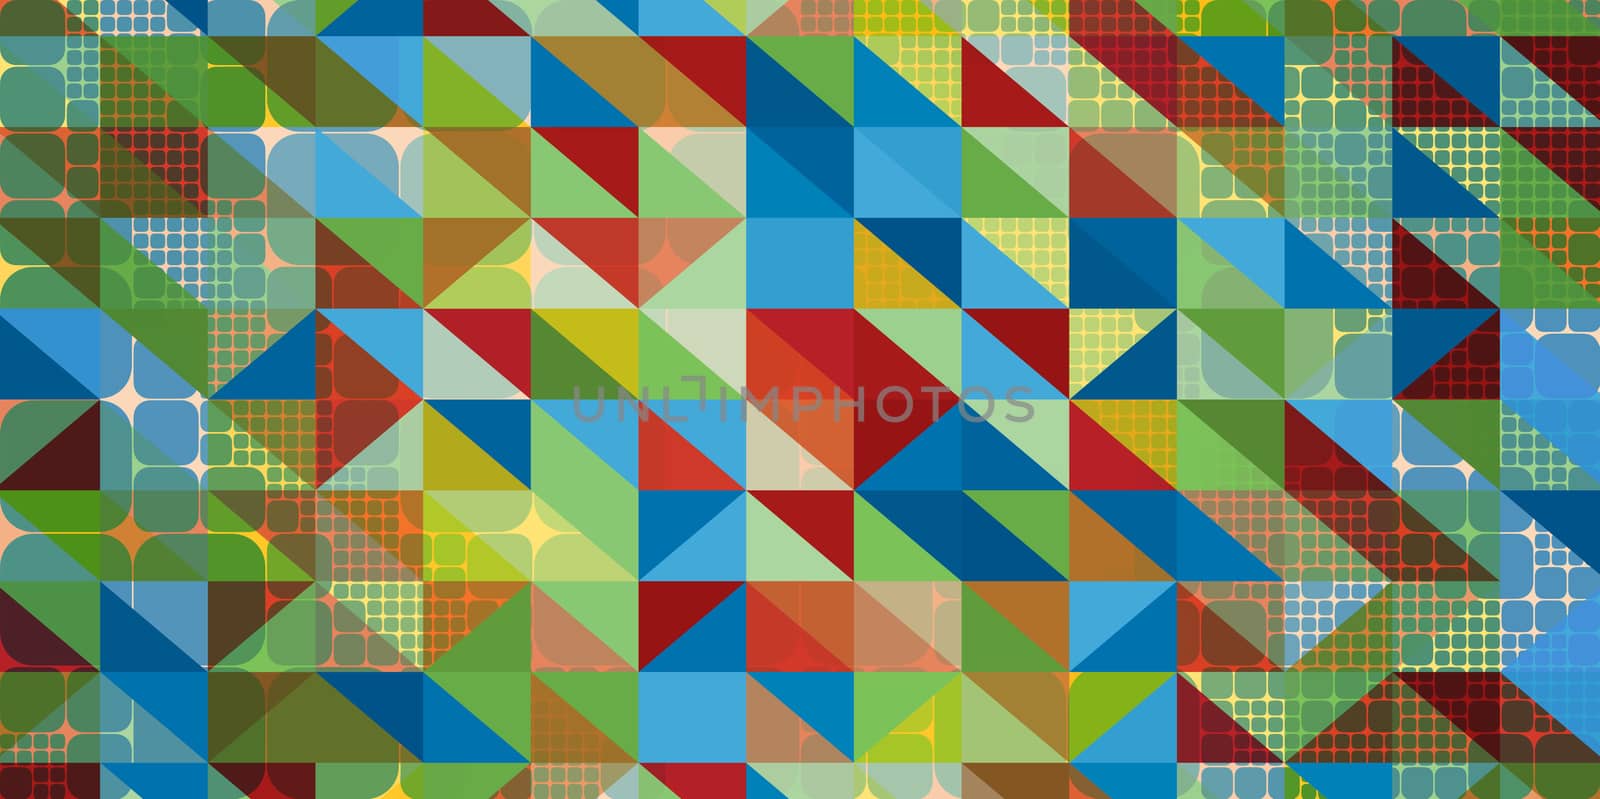 Abstract bright graphic art pattern background full of squares and triangles.